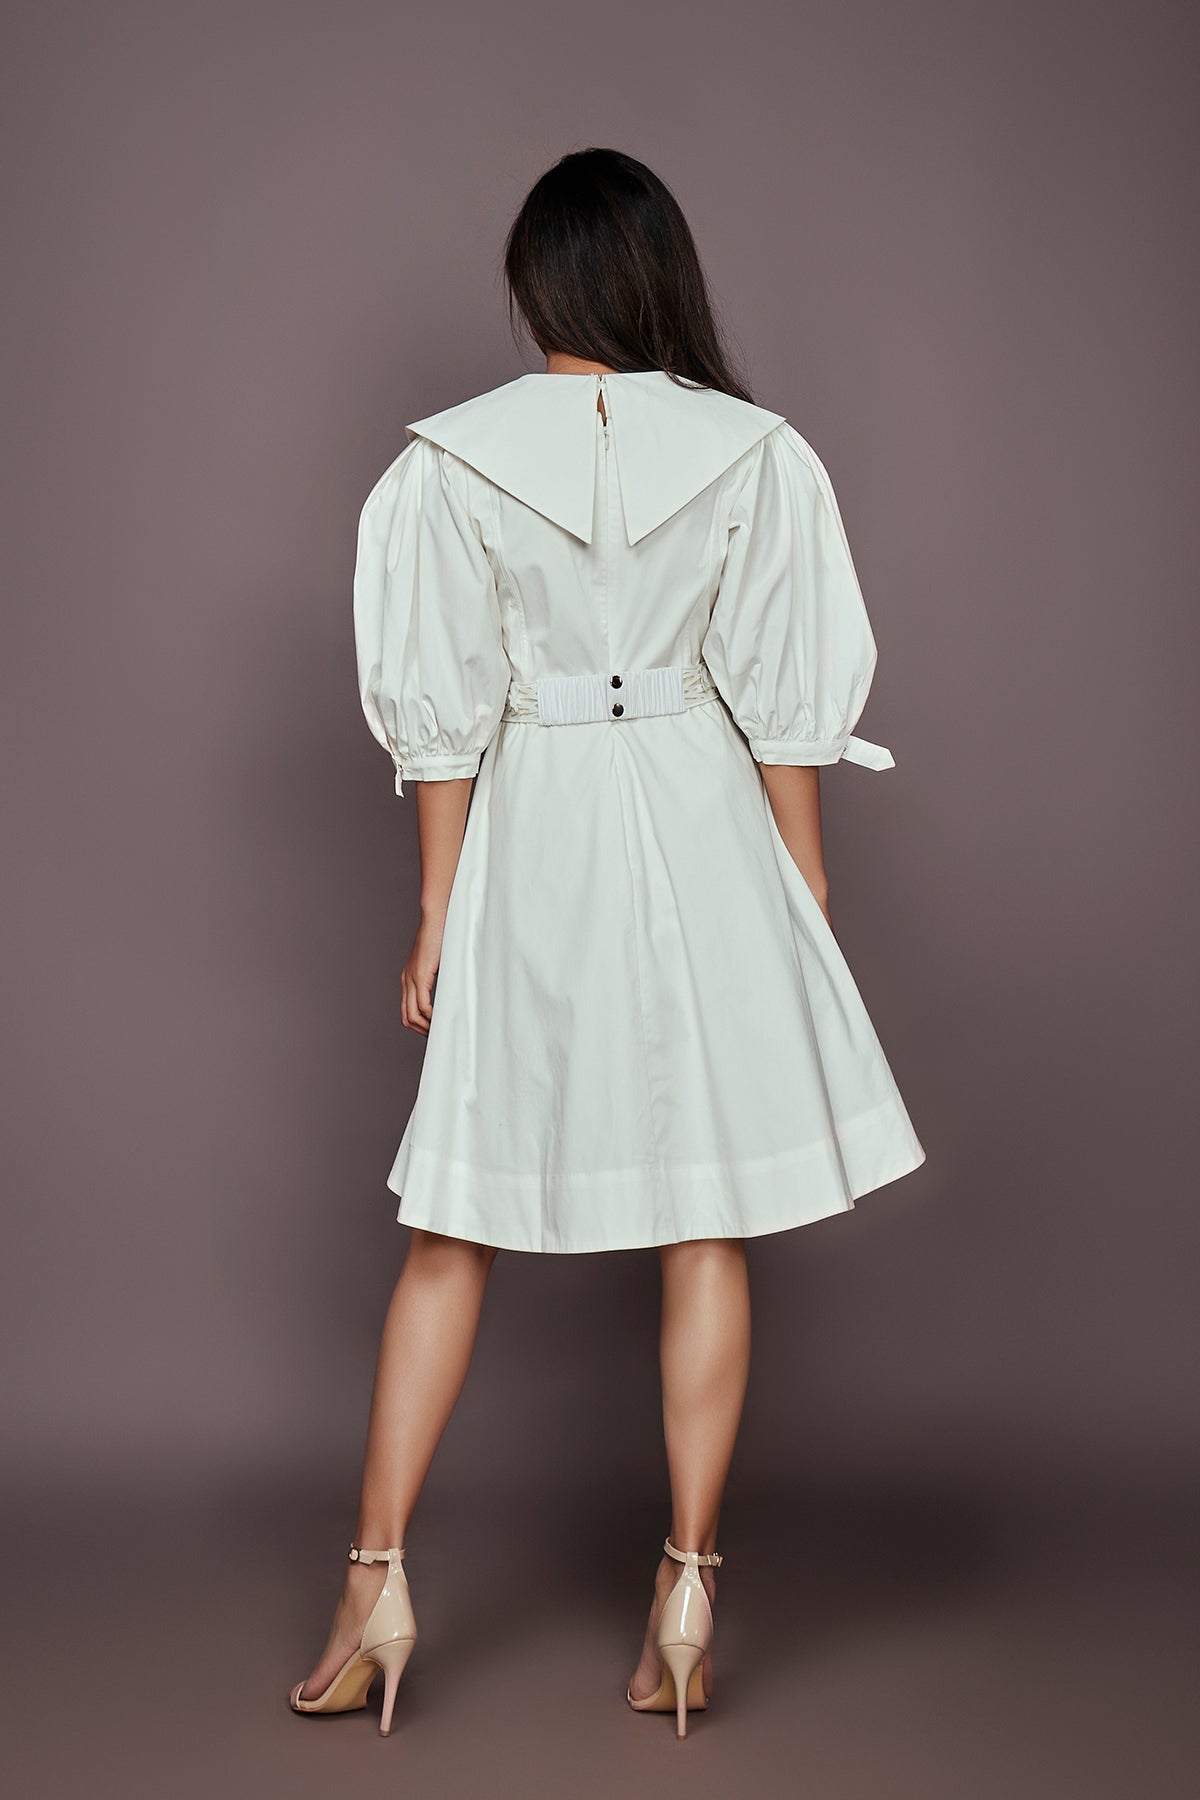 White Dress With Attached Collar And Belt